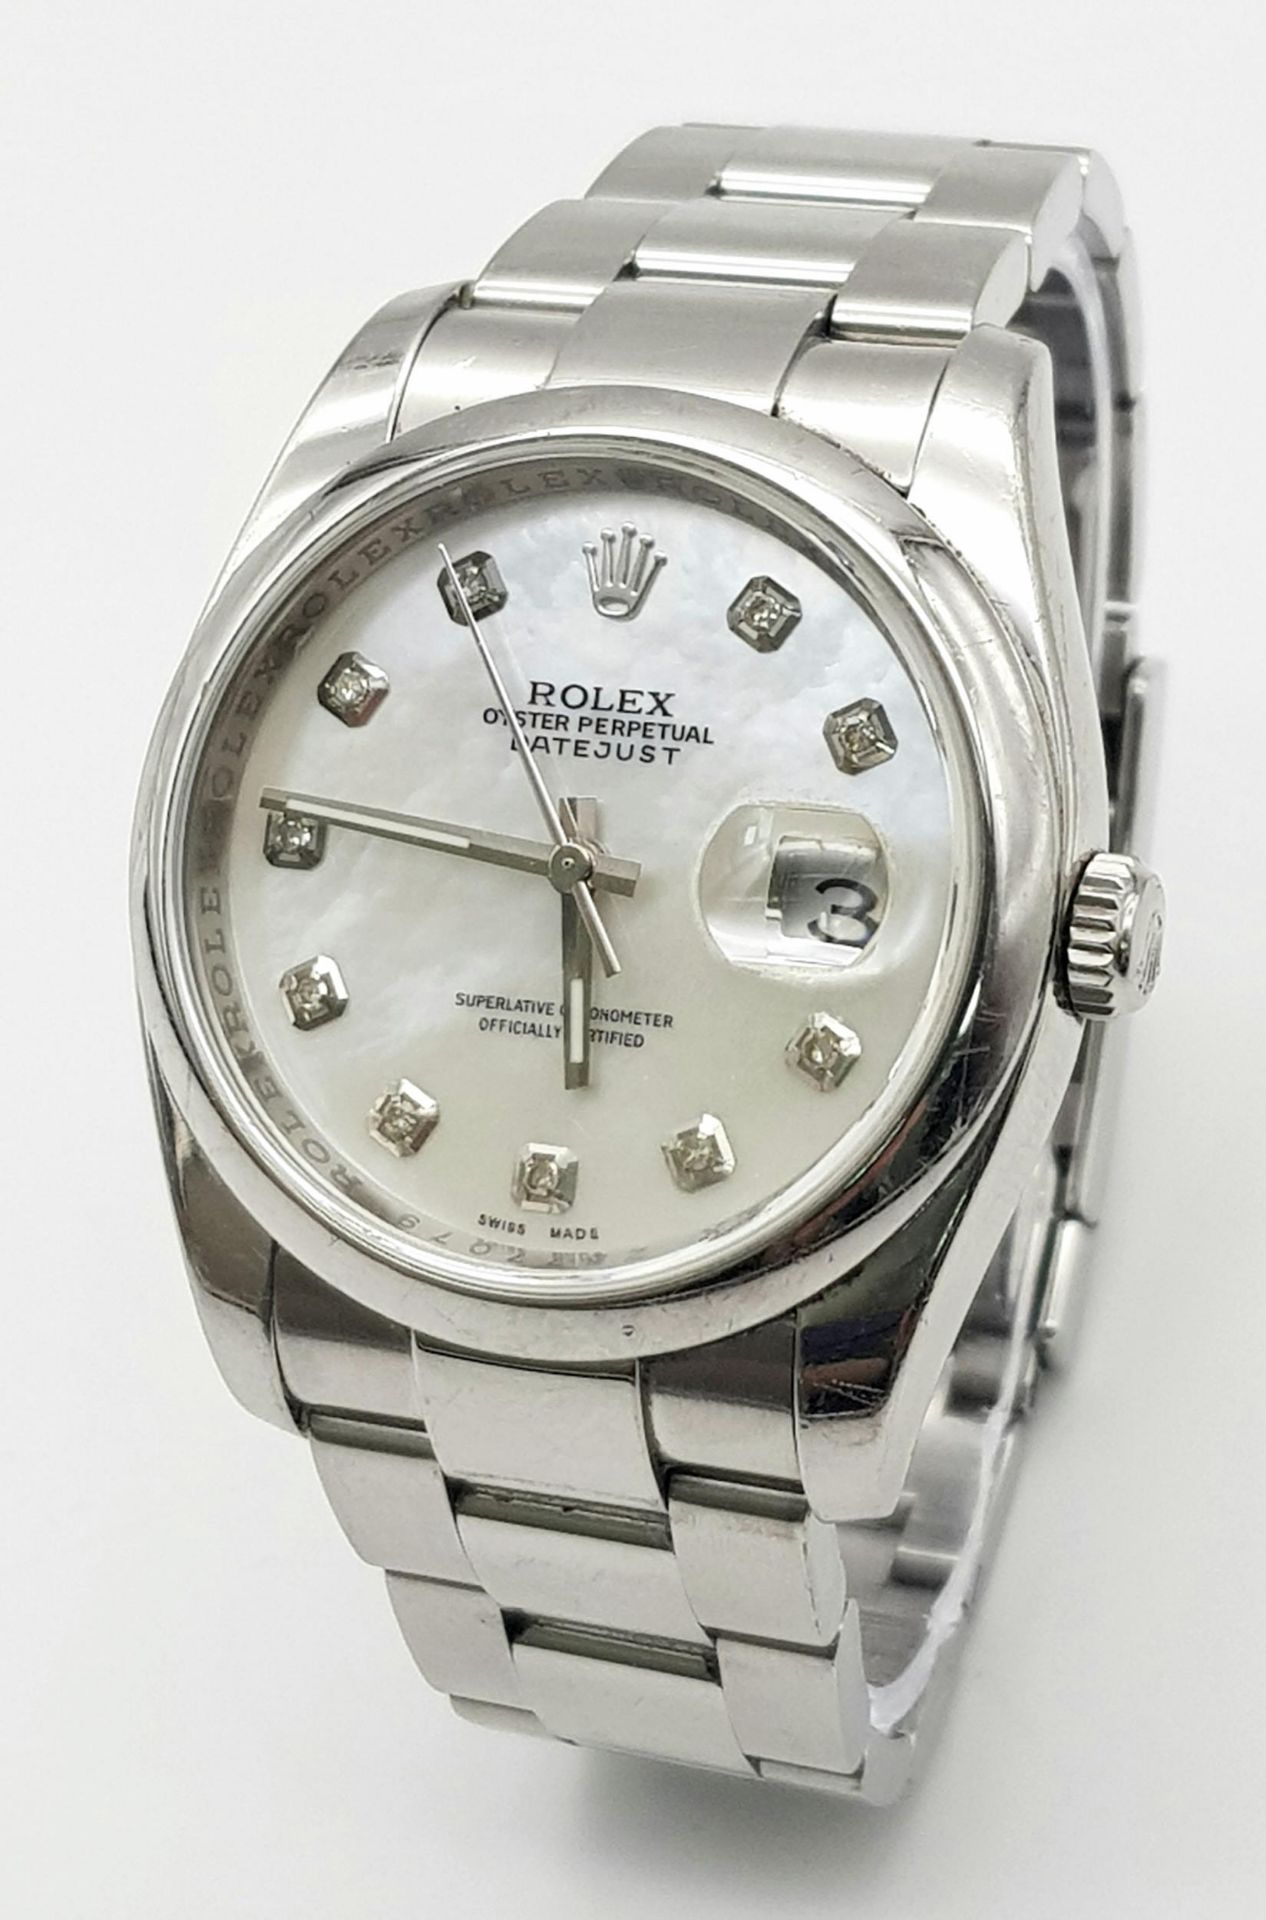 A Rolex Datejust Diamond Gents Automatic Watch. Stainless steel bracelet and case - 36mm. Mother - Bild 2 aus 7